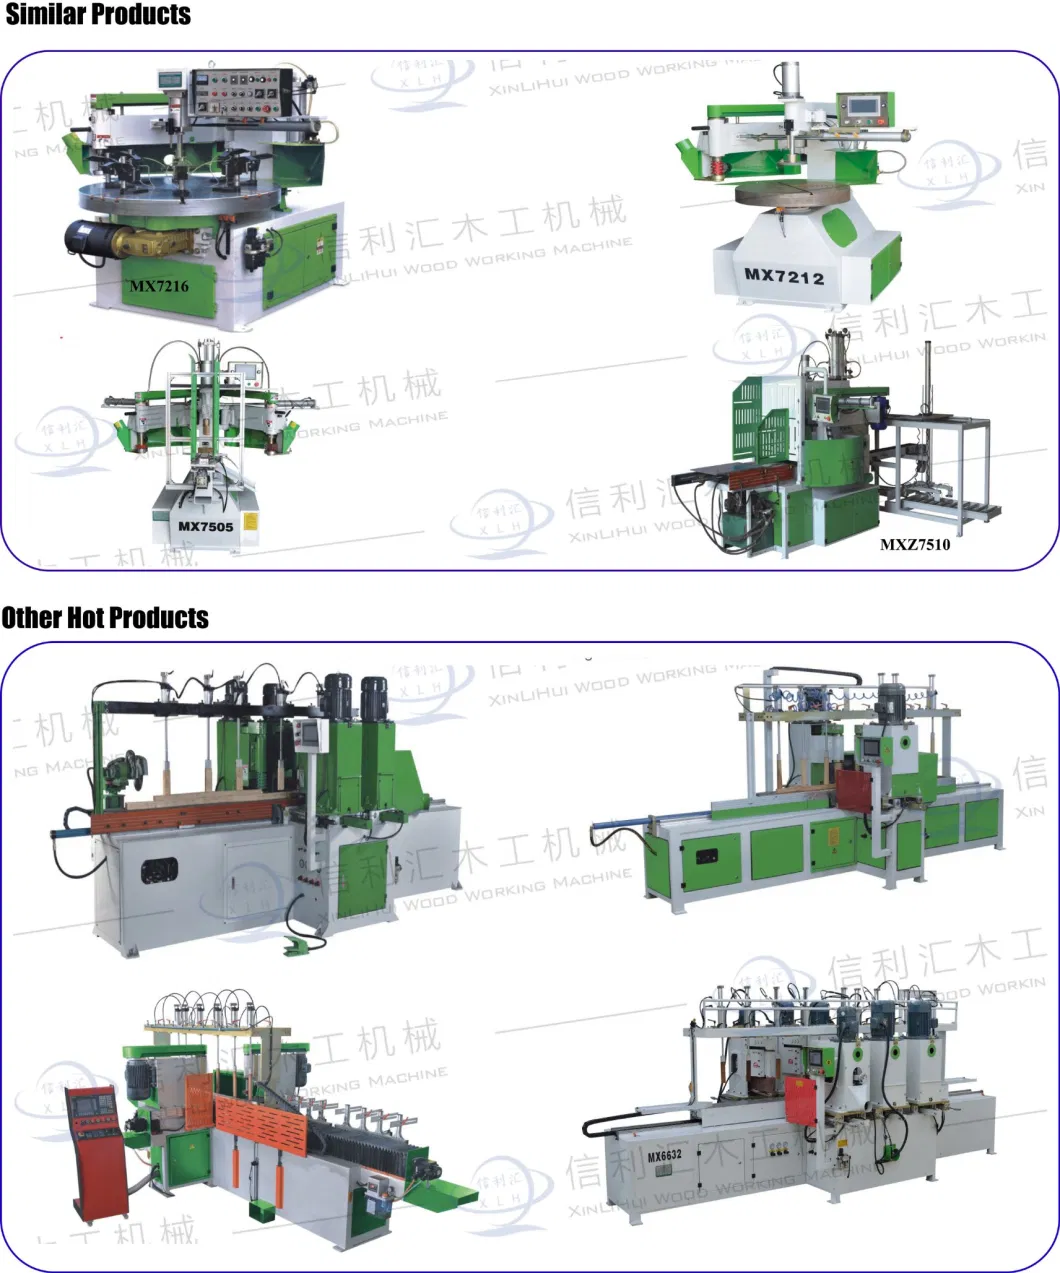 Gantry Planer Type Milling Machine, Composite Processing Center CNC Wood Copy Profile Lathe Machine for Wooden Brush /Handle /Spoon Making